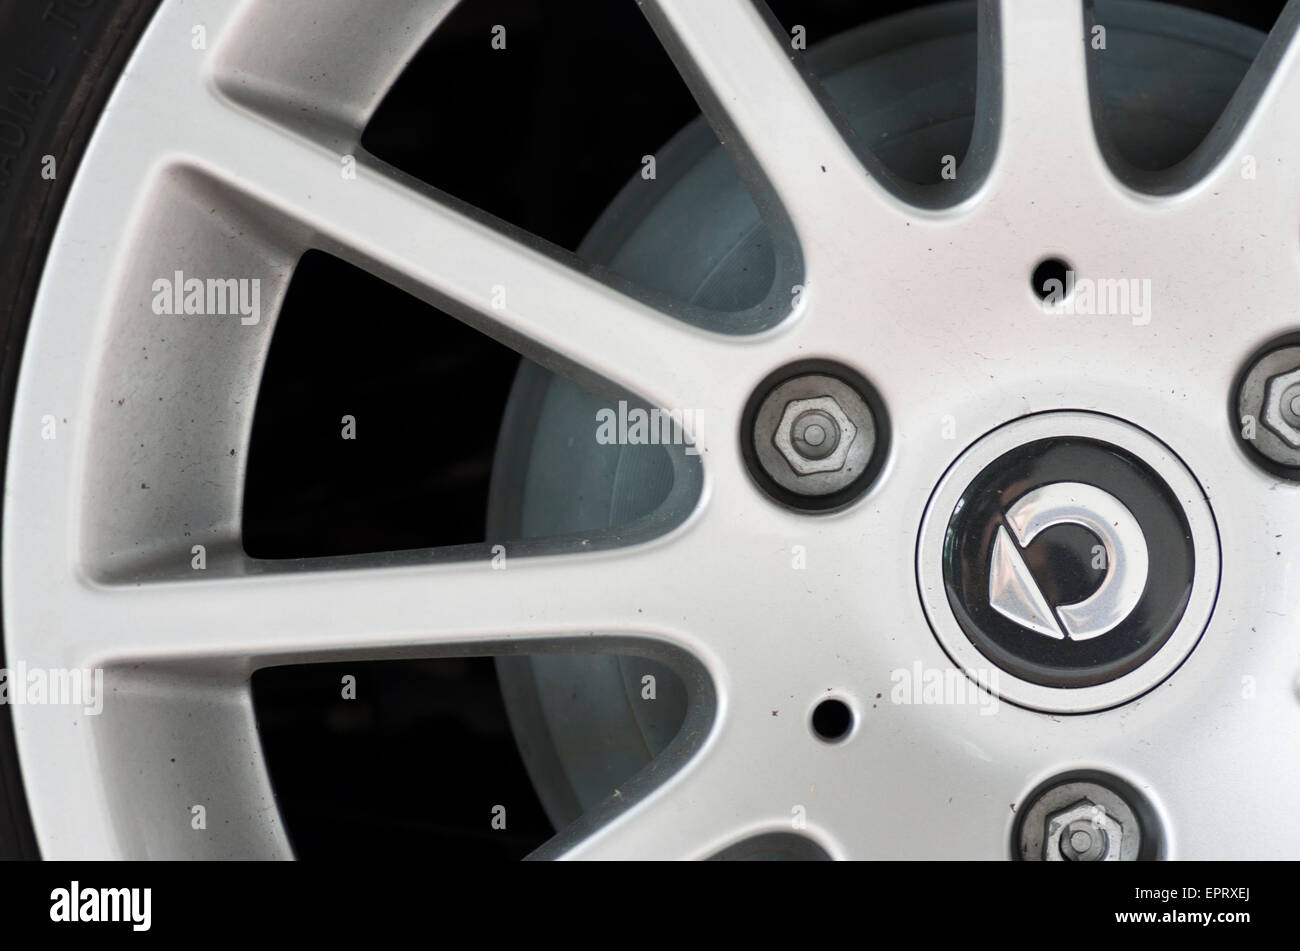 SMART alloy wheel with logo - SAMRT is a division of DAIMLER AG a well known German premium, sport and luxury car maker Stock Photo